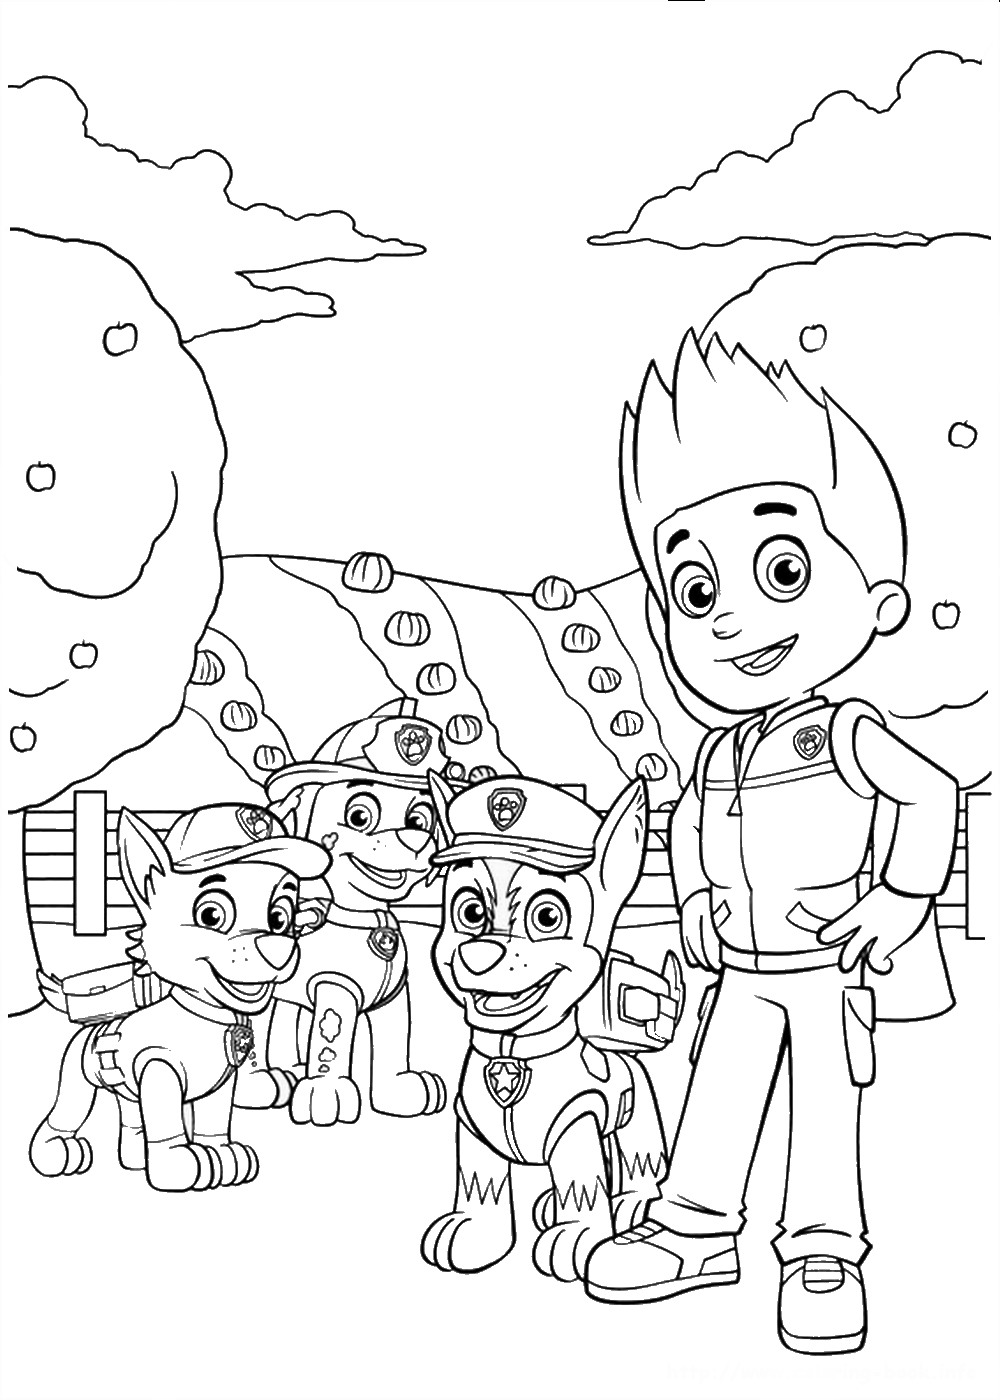 Paw Patrol Coloring Pages FREE Printable 159